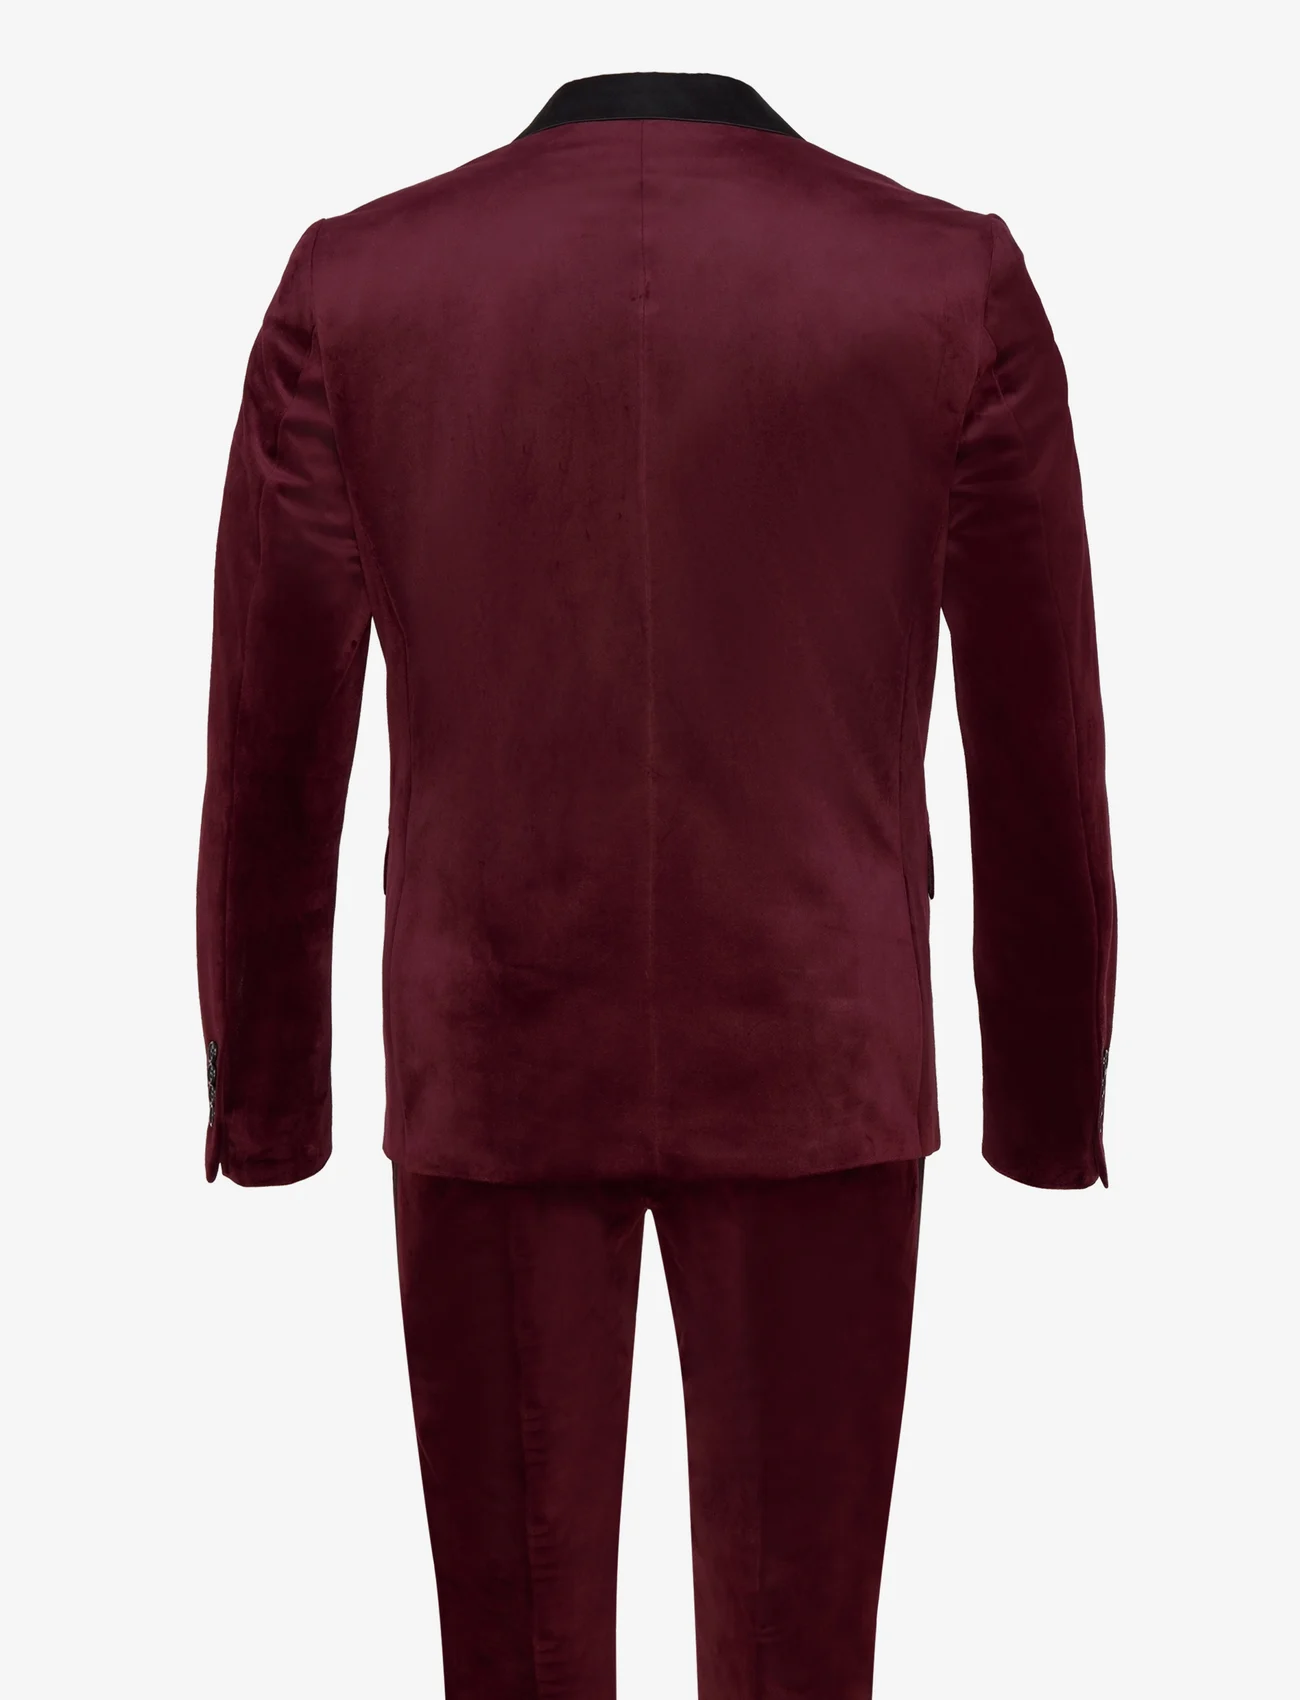 Lindbergh - Velvet tuxedo suit - double breasted suits - burgundy - 1